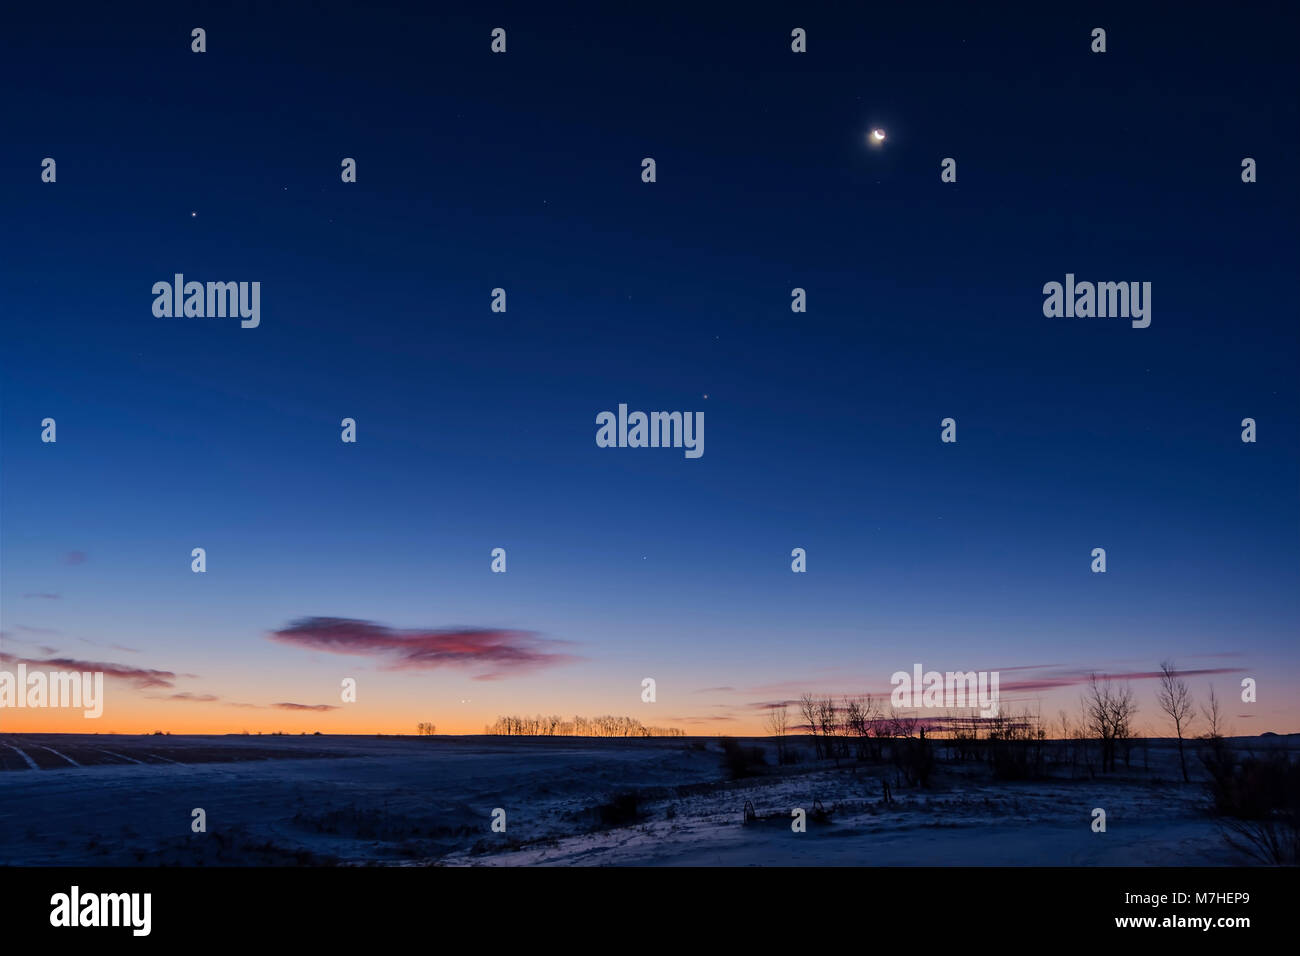 Venus and Jupiter in close conjunction very low in the southeast sky, Alberta, Canada. Stock Photo